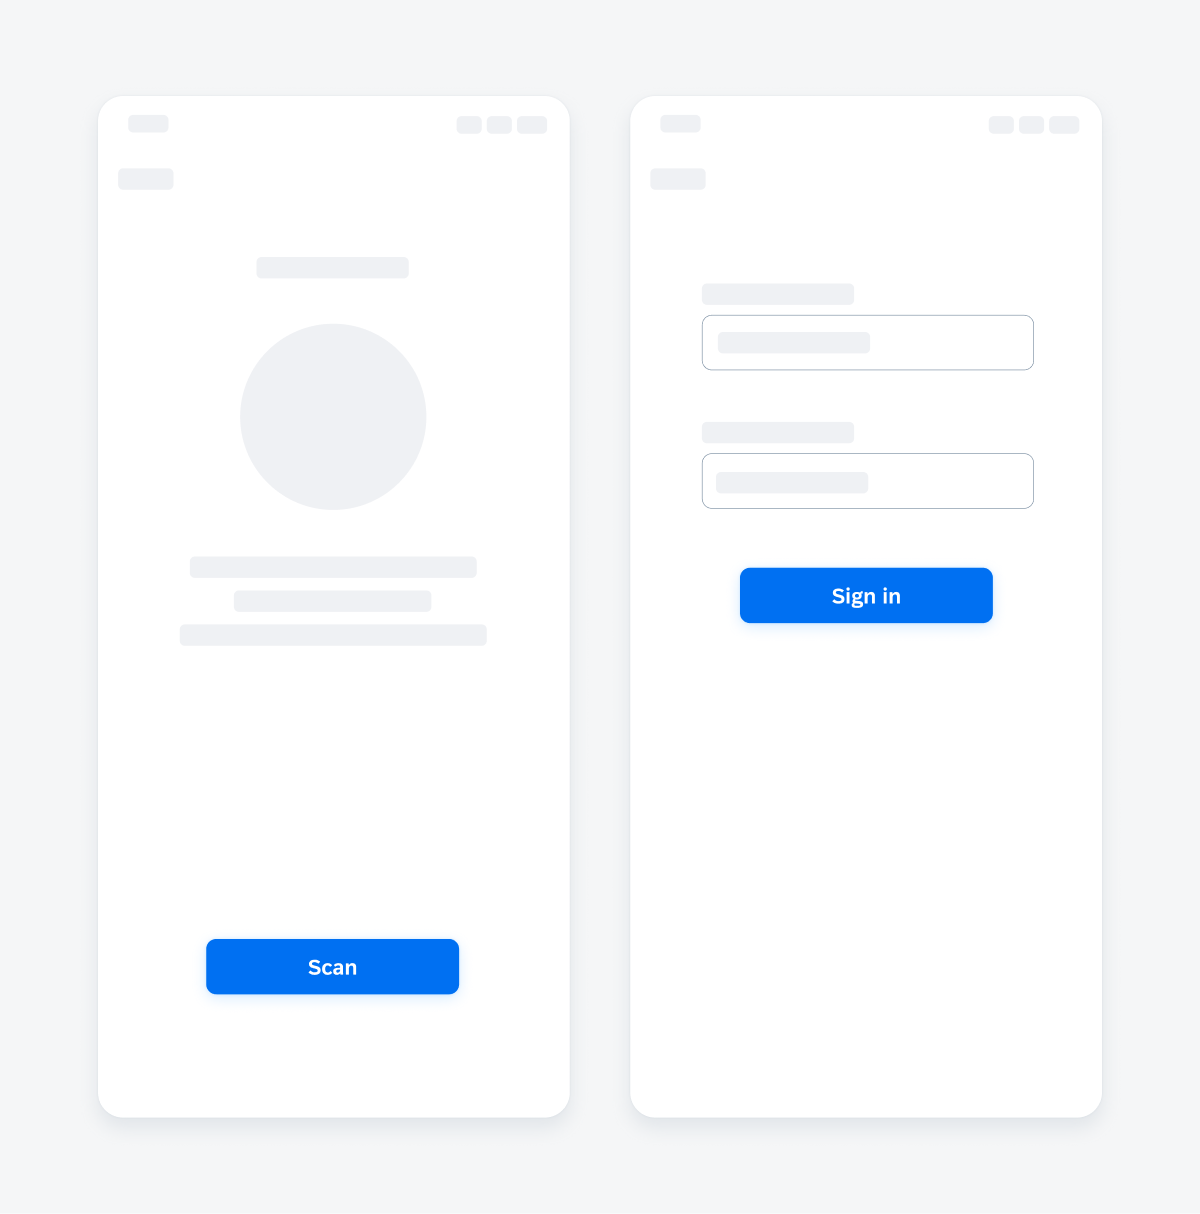 Primary buttons in scan and sign-in use cases